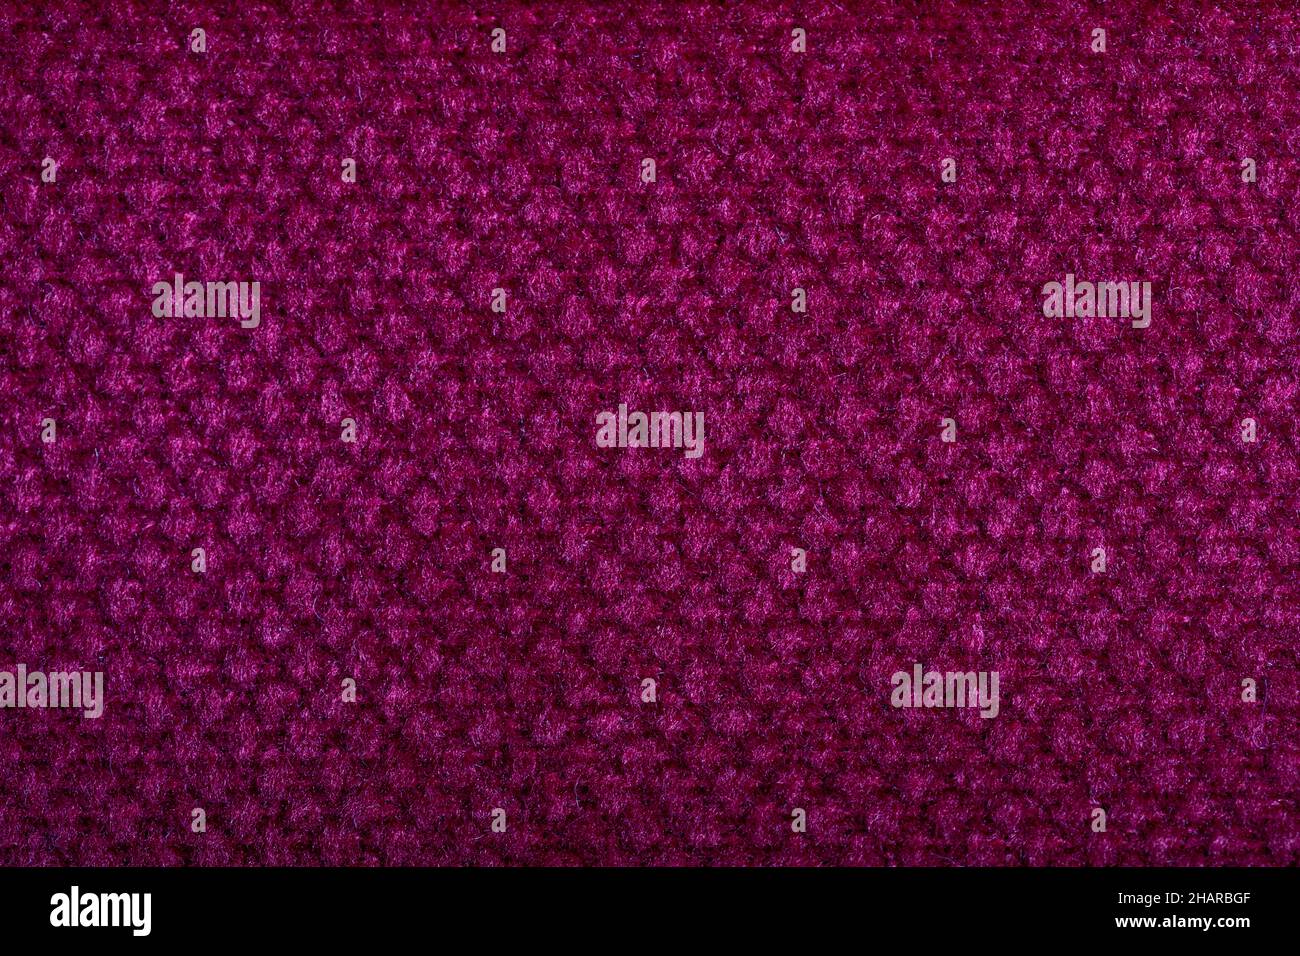 Purple fabric texture. Furniture upholstery textiles. Embossed pattern. Woven fibers. The material is soft touch. Minimalism concept. High detail macr Stock Photo